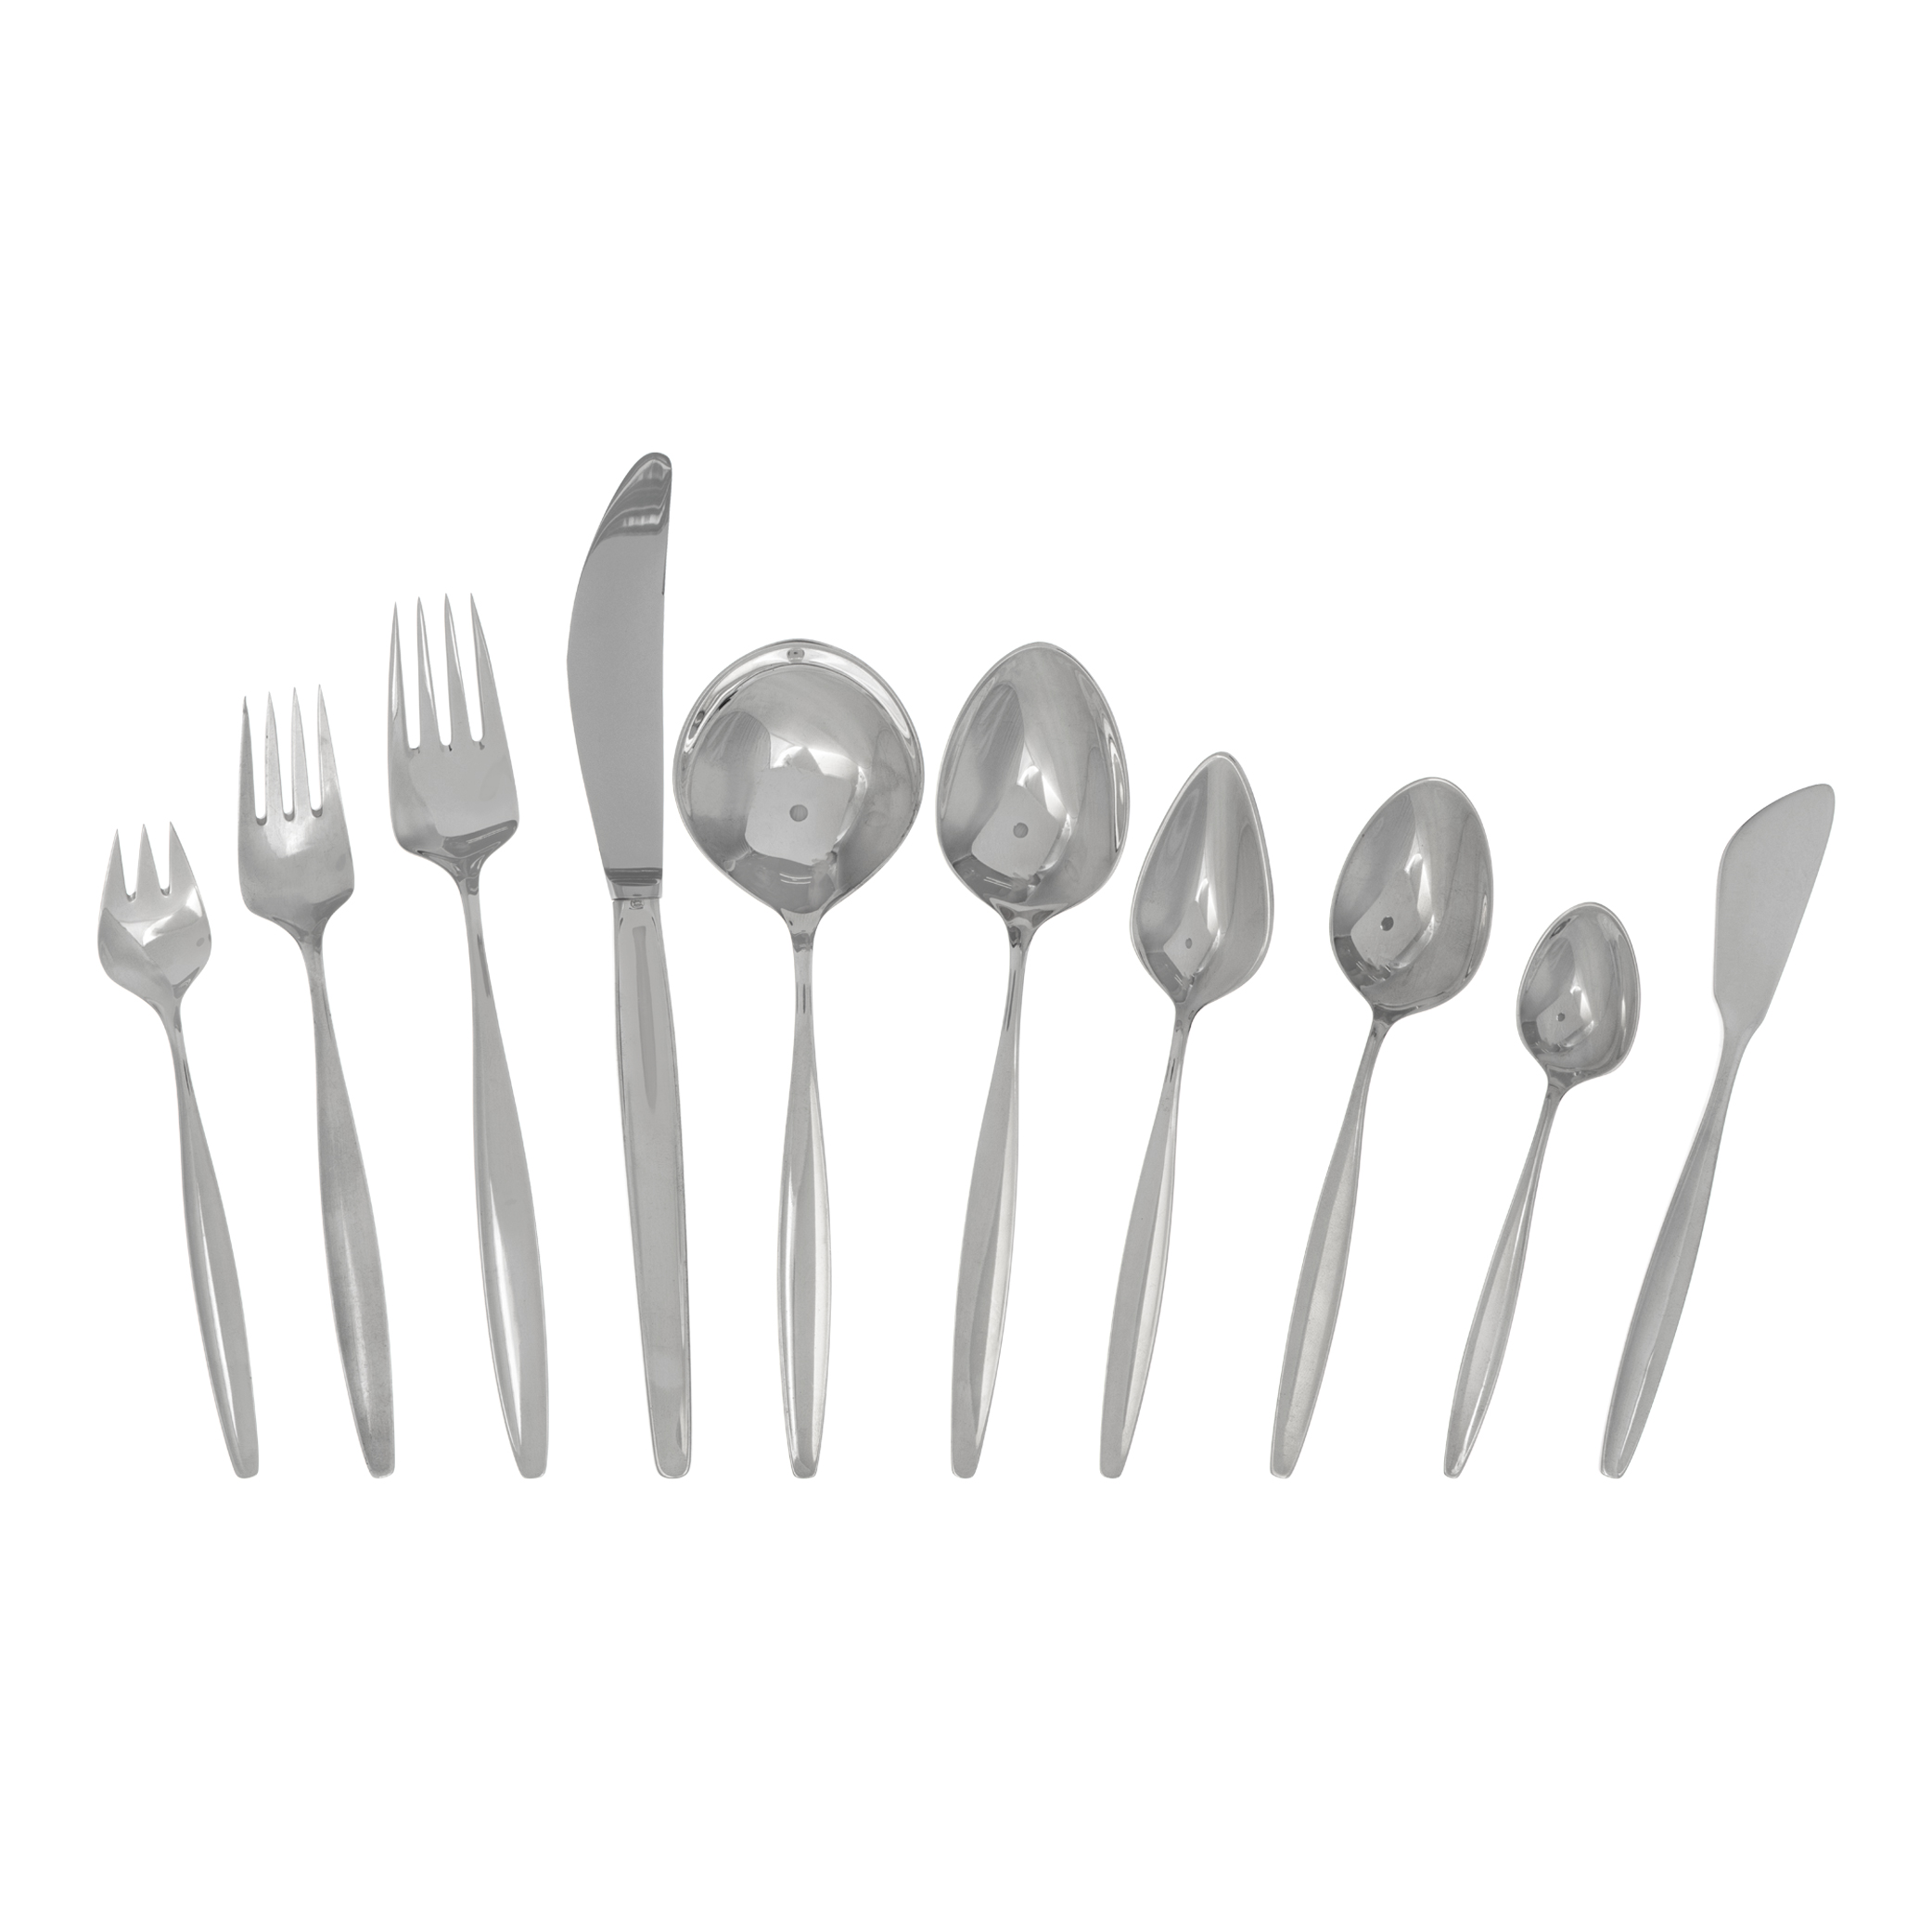 CYPRESS, GEORG JENSEN sterling silver flatware set patented in 1953- 12 place setting for 12 (including fish set) and 15 serving pieces. TOTAL: 159 pieces